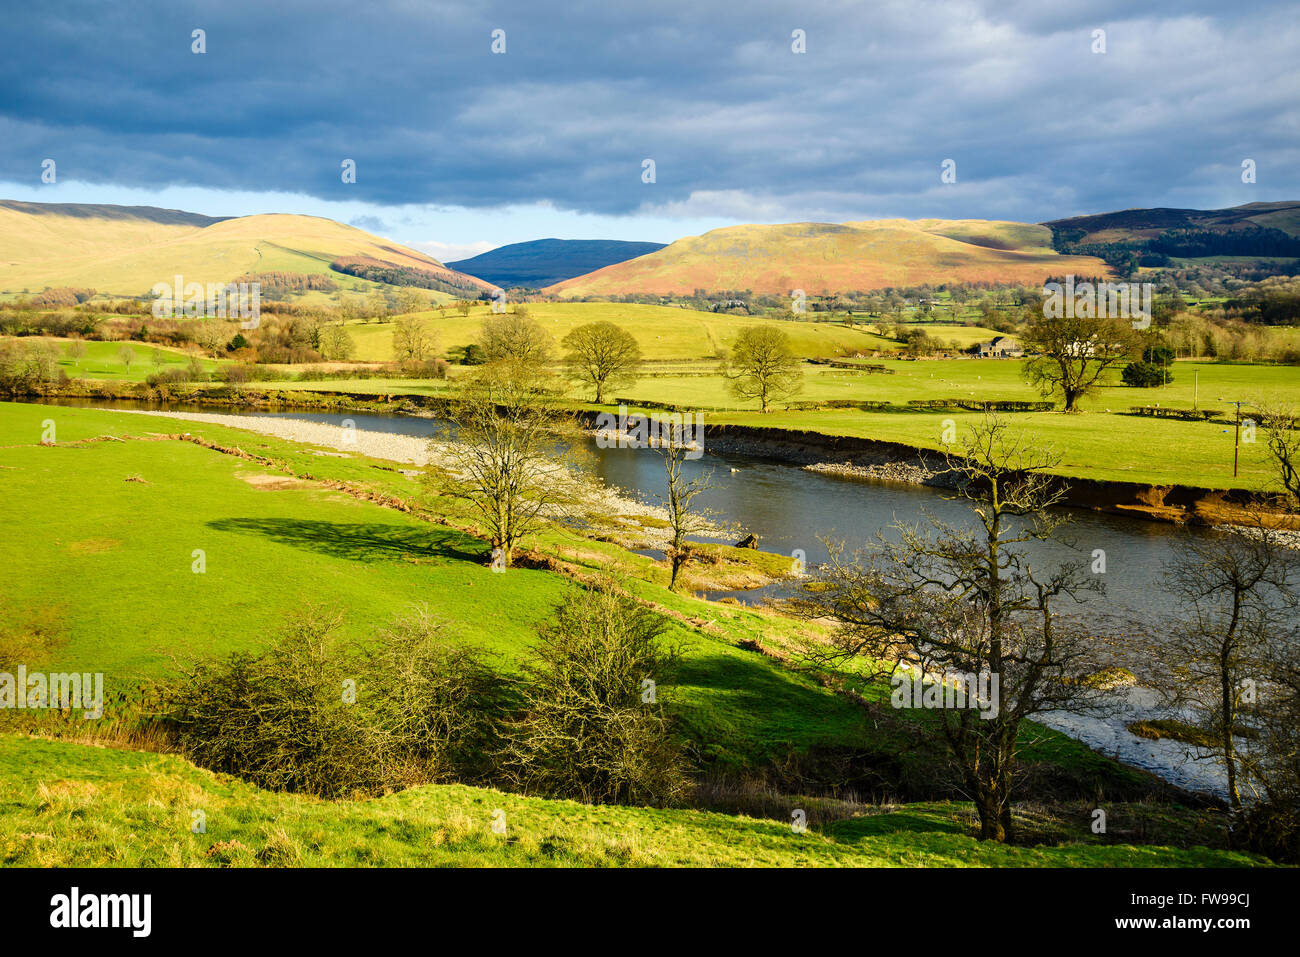 View Across River Lune At Mansergh Near Kirkby Lonsdale Cumbria The